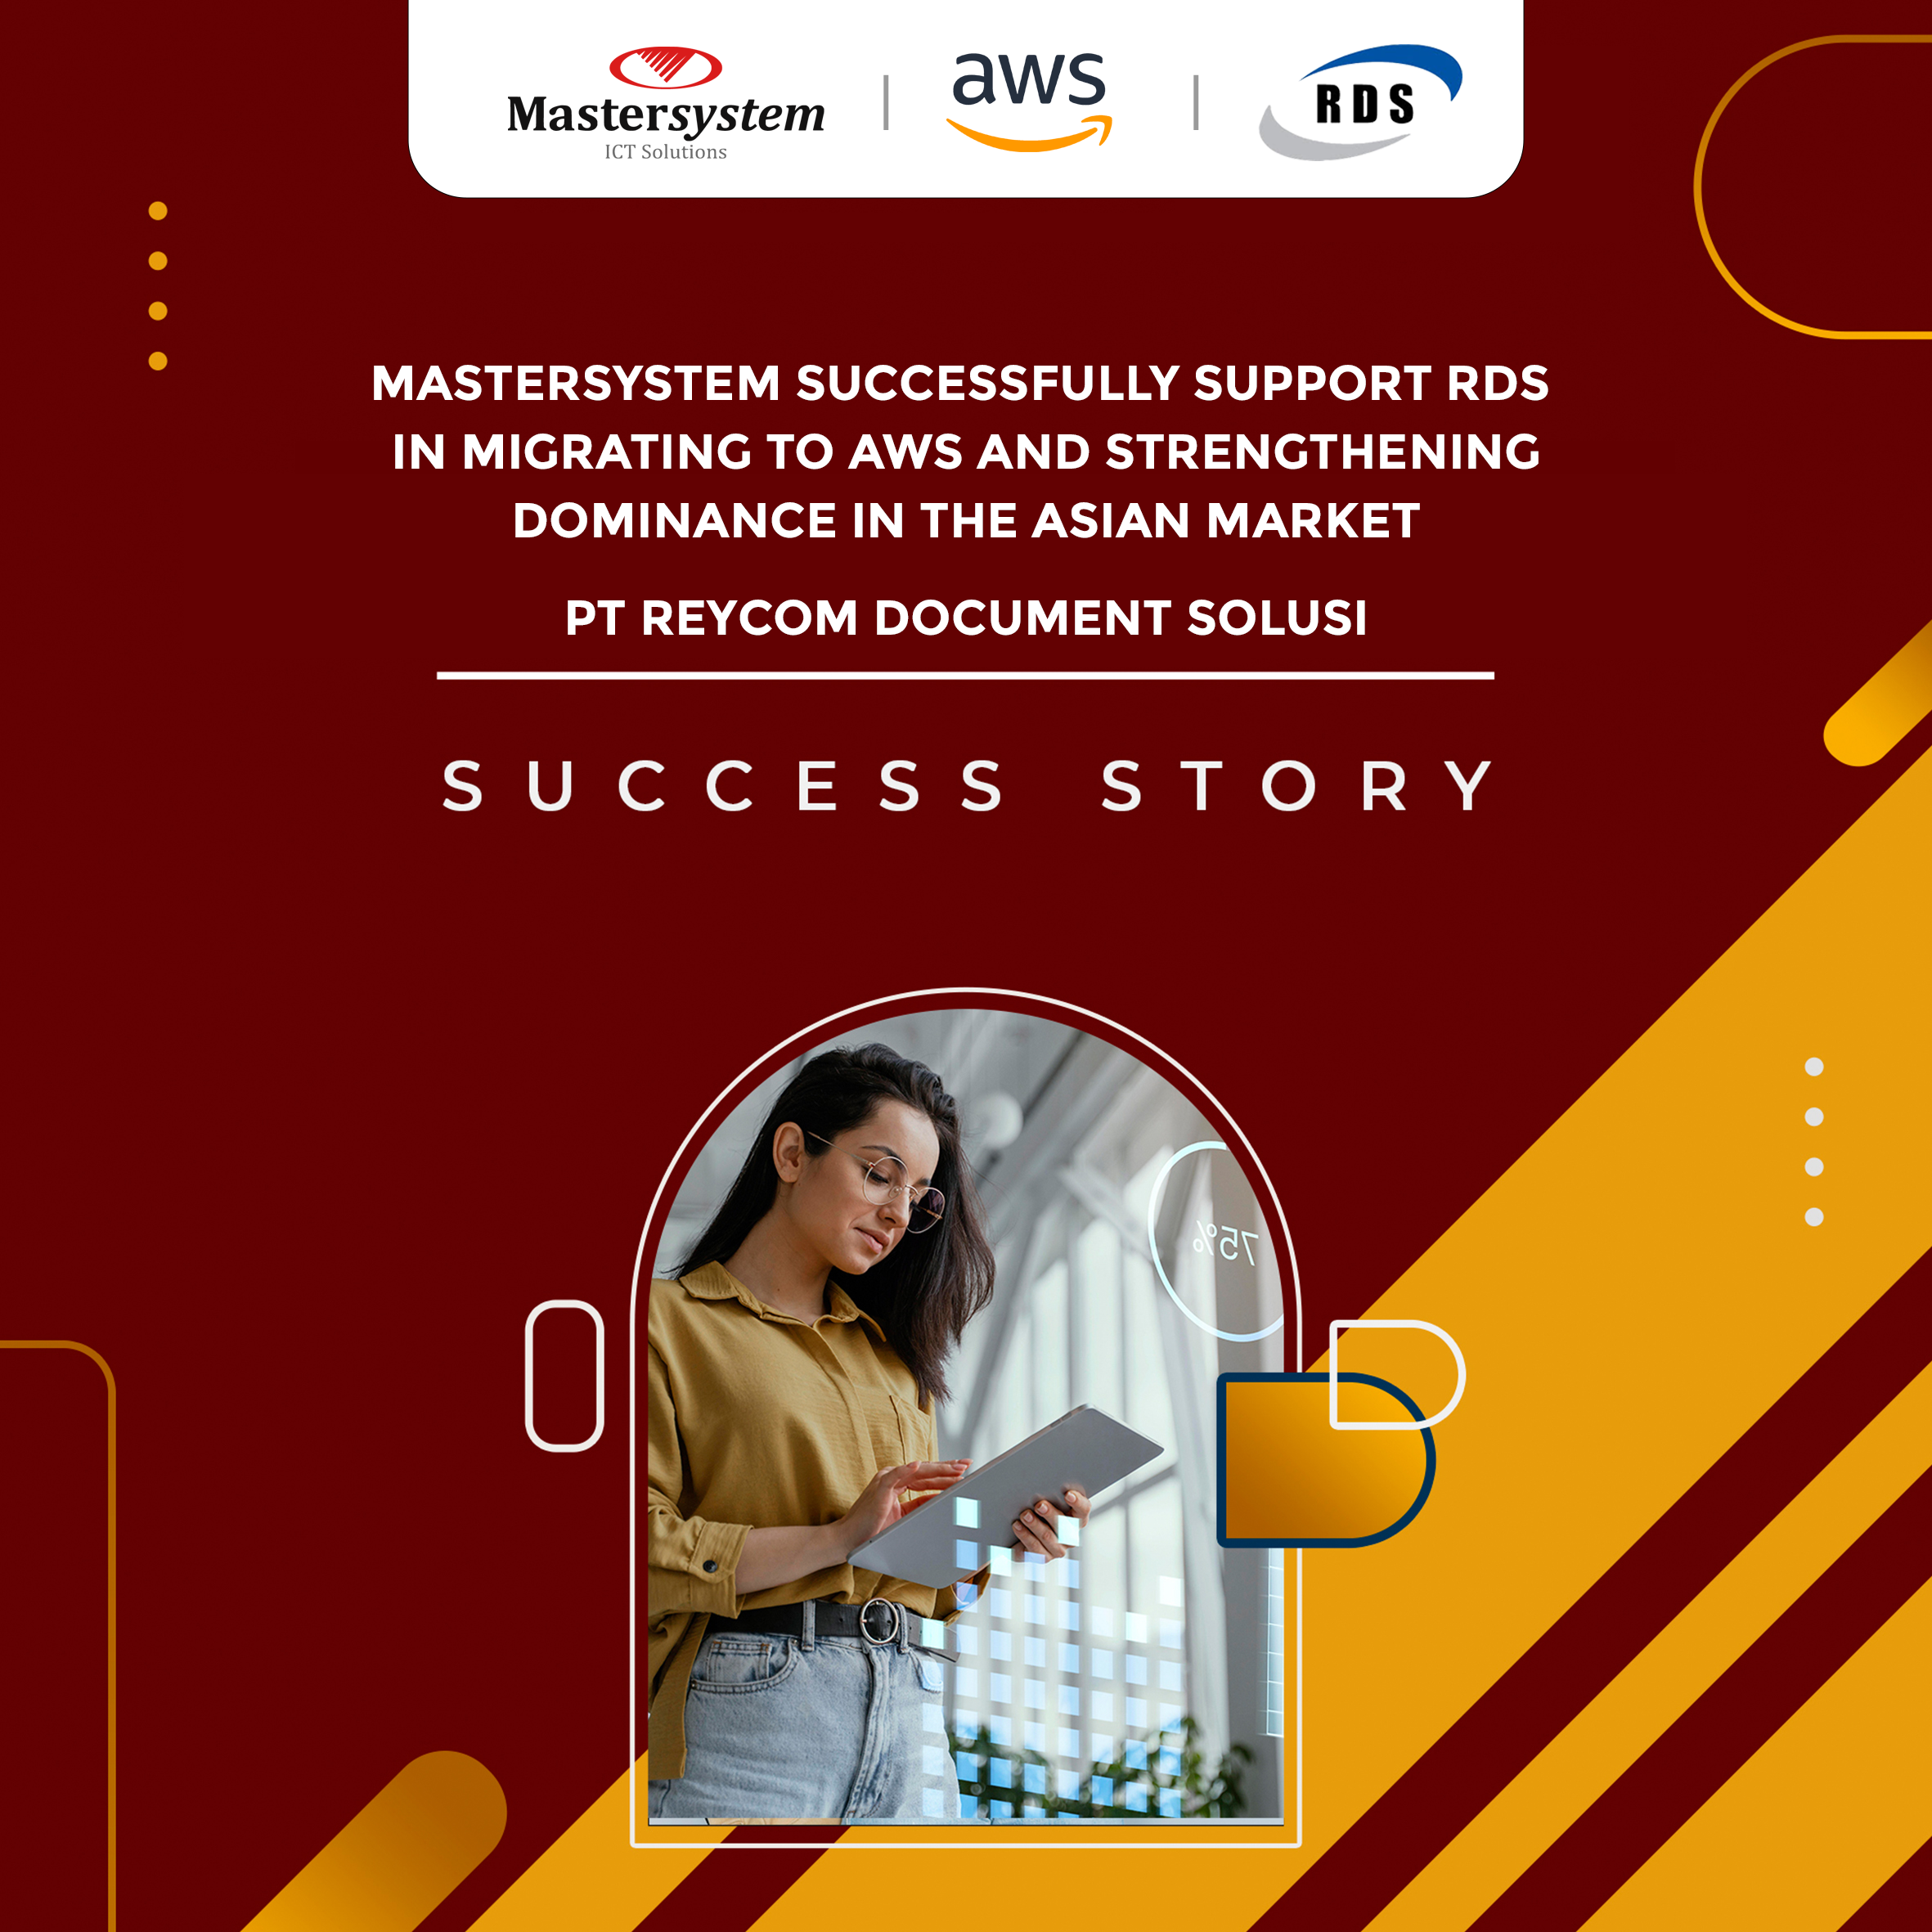 Mastersystem Successfully Support RDS in Migrating to AWS and Strengthening Dominance in the Asian Market